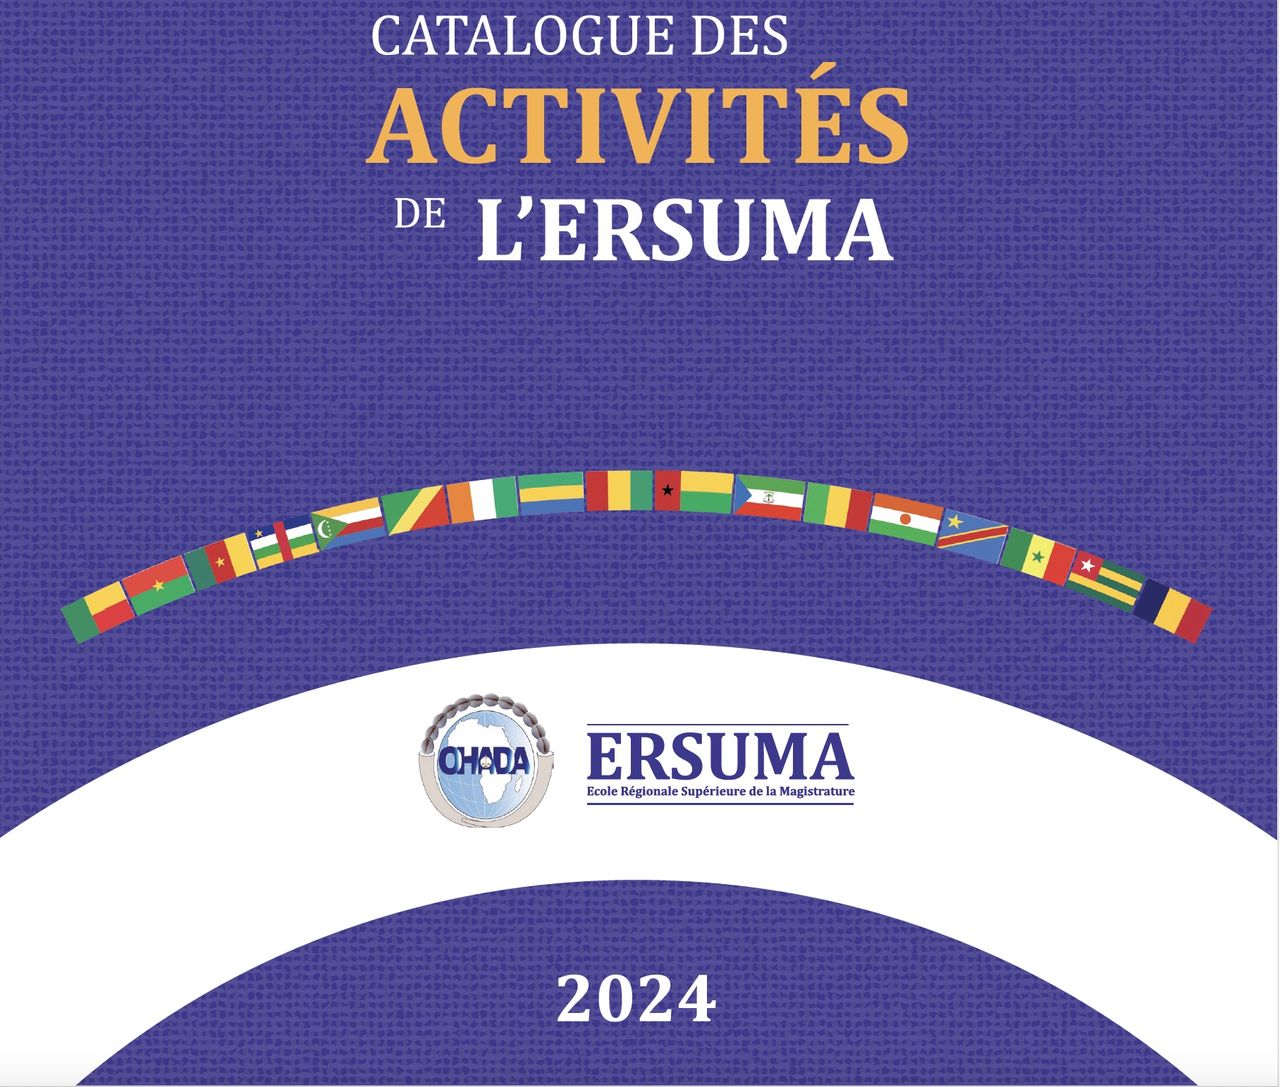 ERSUMA-OHADA: LAUNCH OF THE 2024 CATALOGUE FOR TRAINING COURSES AND SCIENTIFIC EVENTS